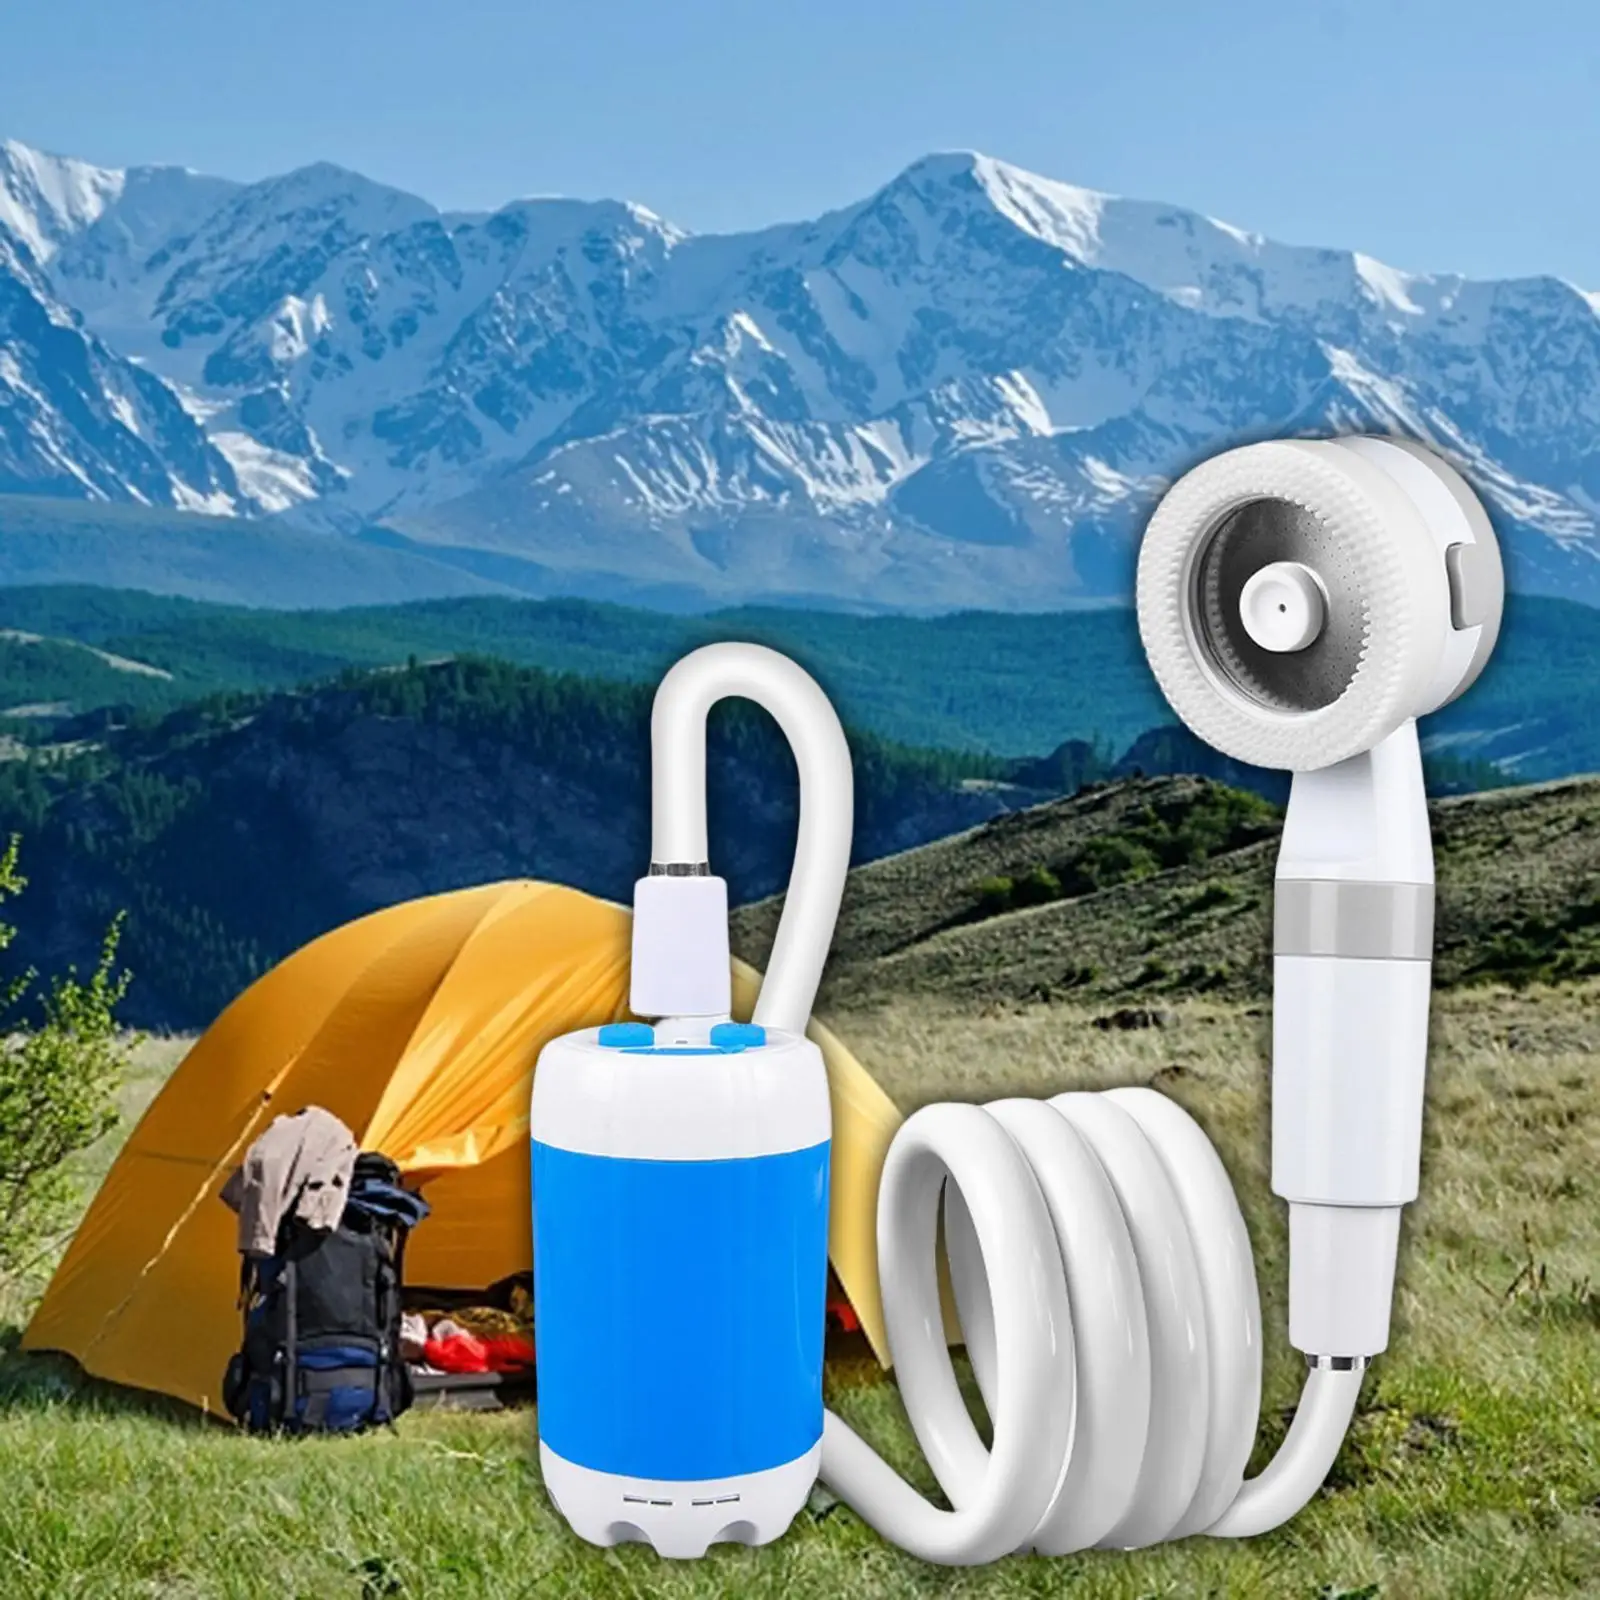 Portable Outdoor Shower Set Handheld Showerhead Camp Shower with Hose for Hiking Traveling Backpacking Gardening Plants Watering